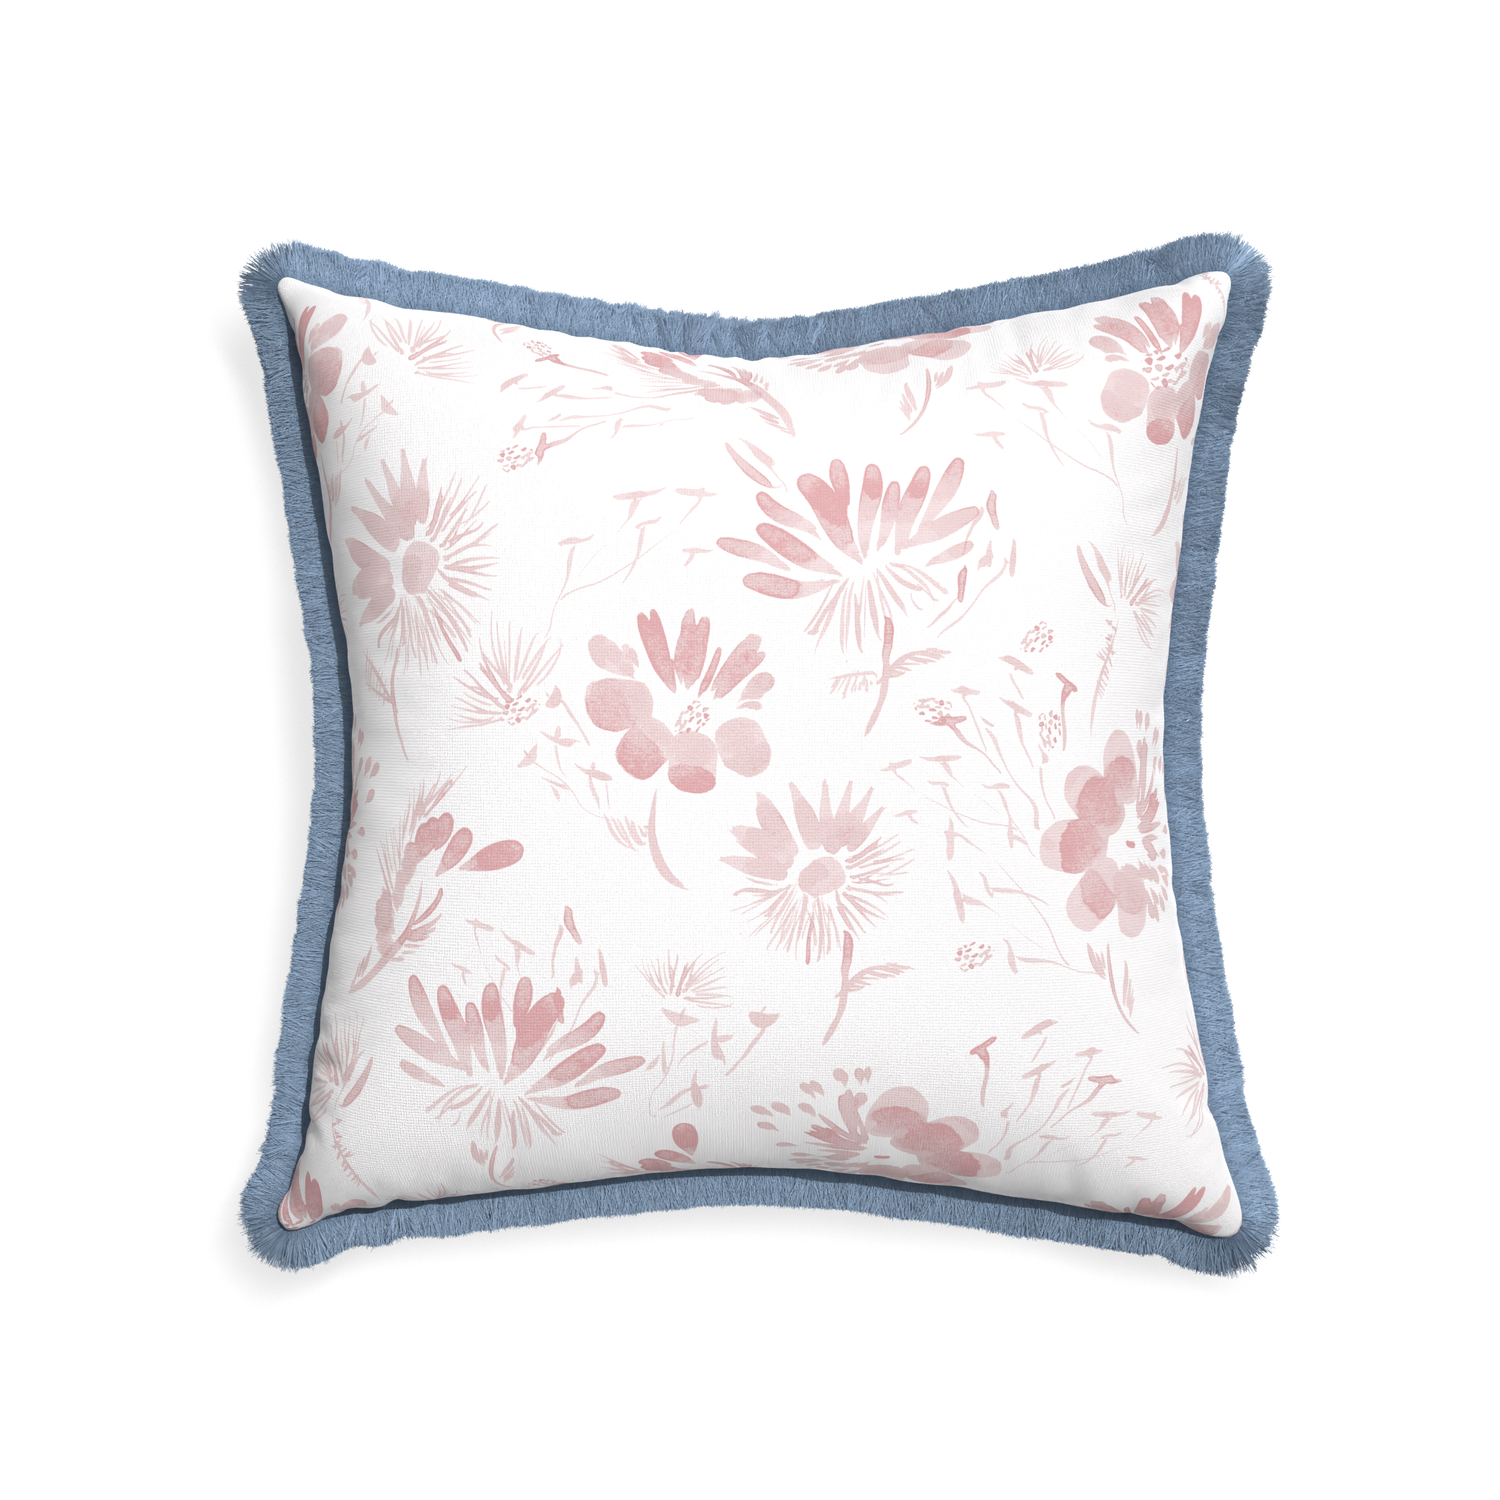 22-square blake custom pink floralpillow with sky fringe on white background